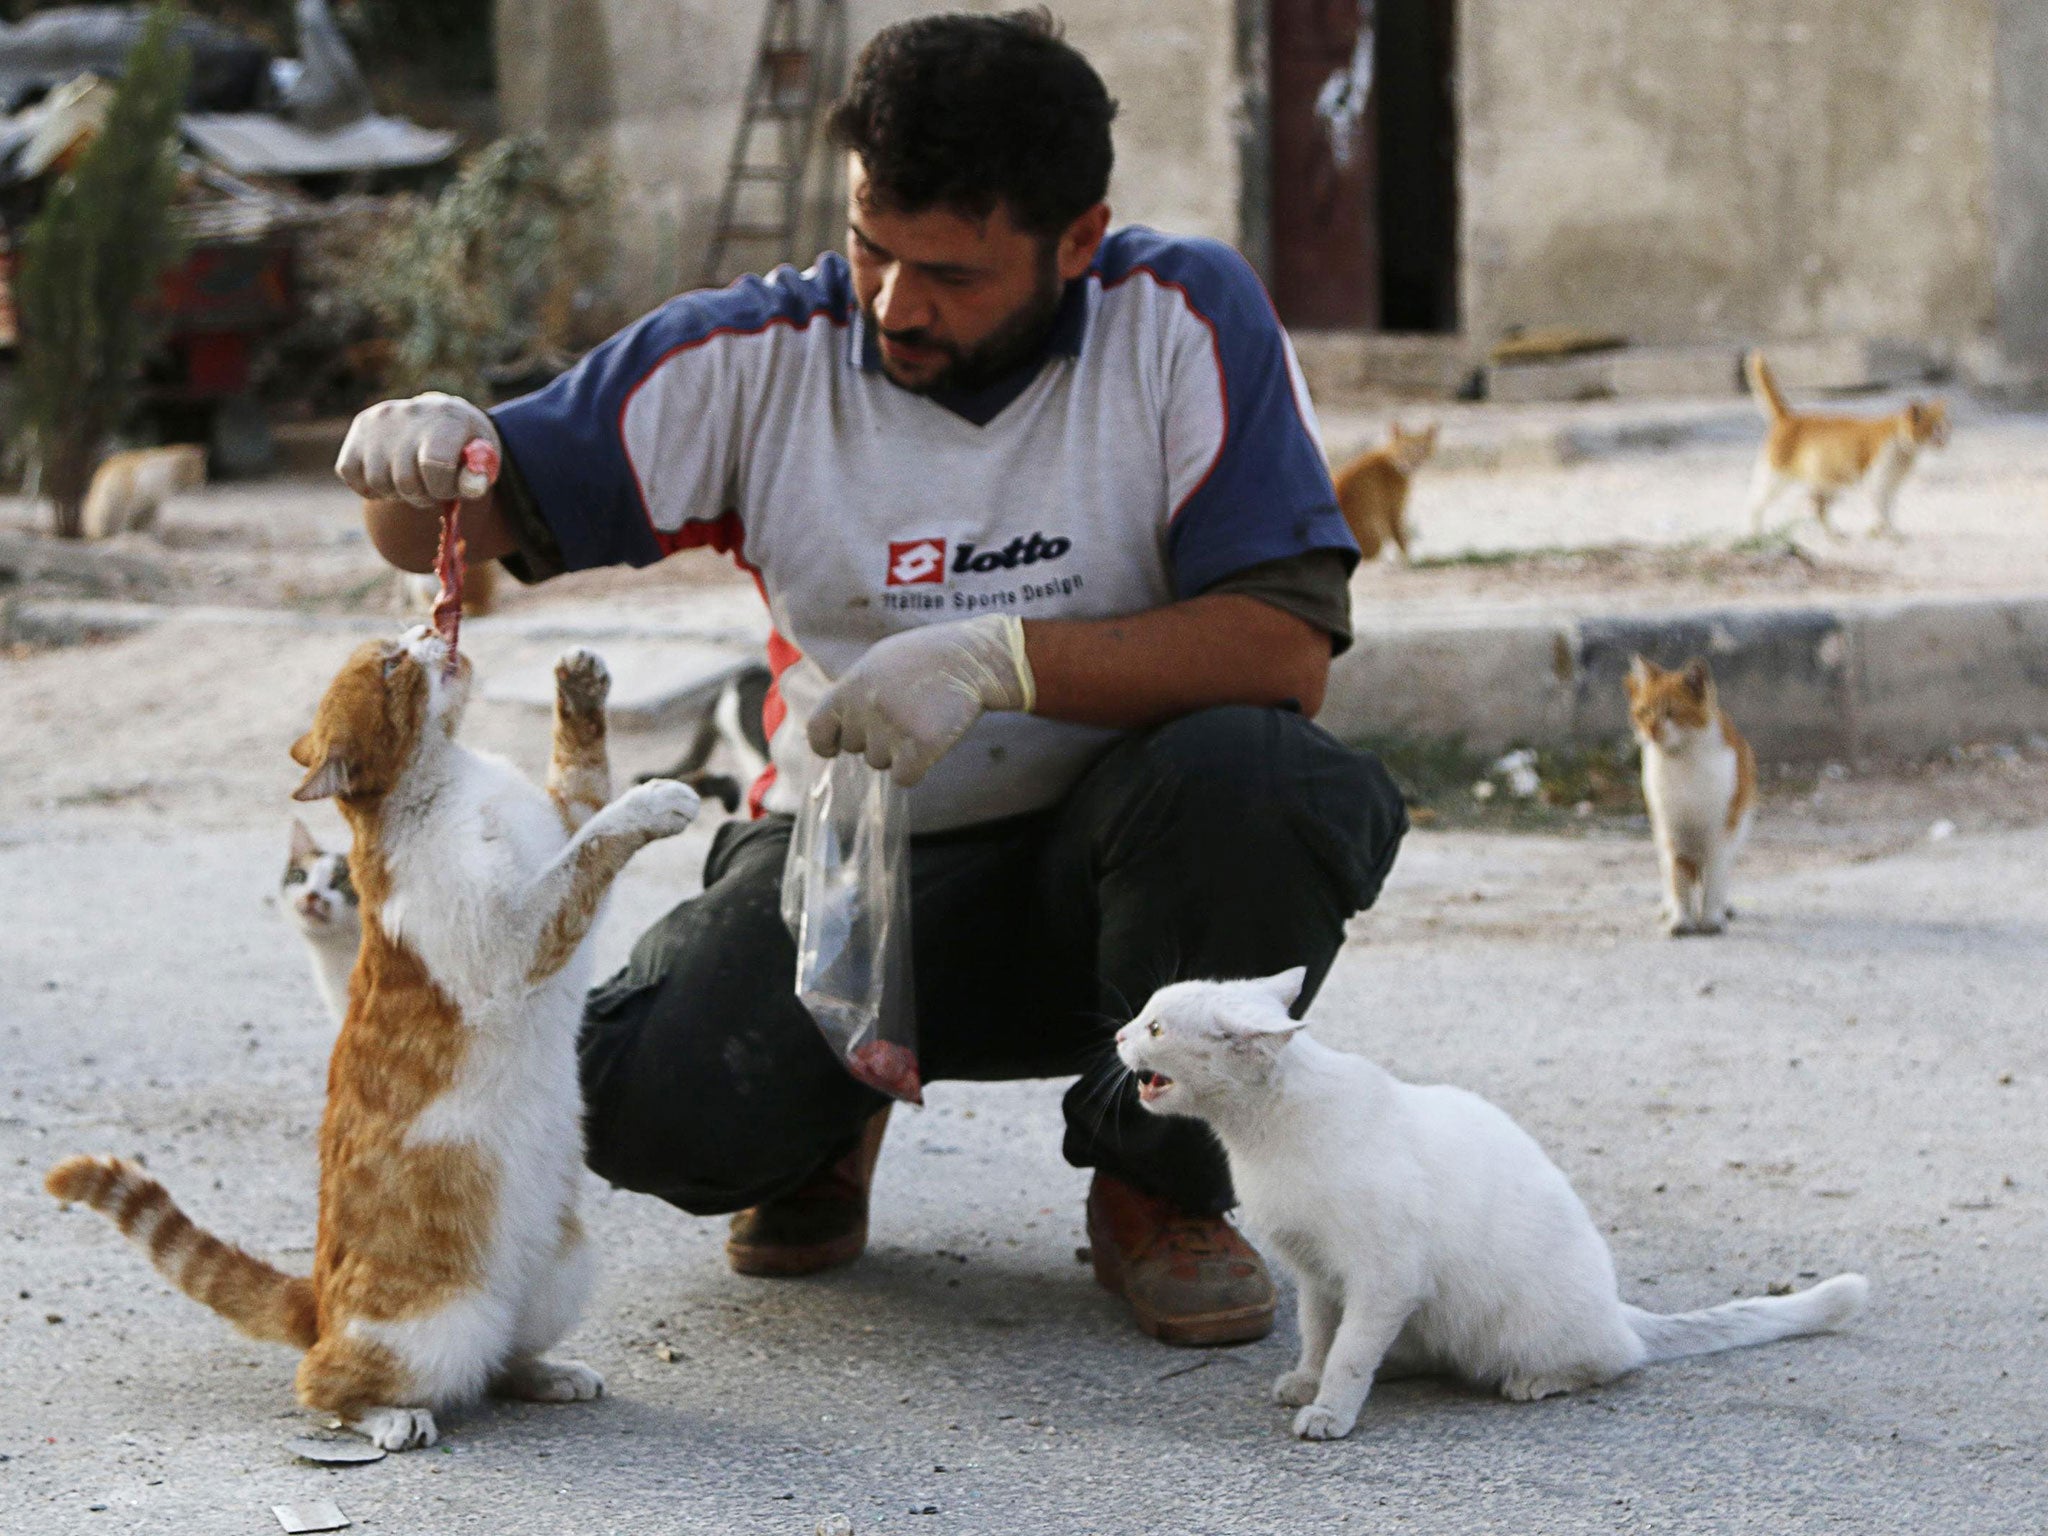 The cats have been abandoned after their owners fled shelling in Aleppo